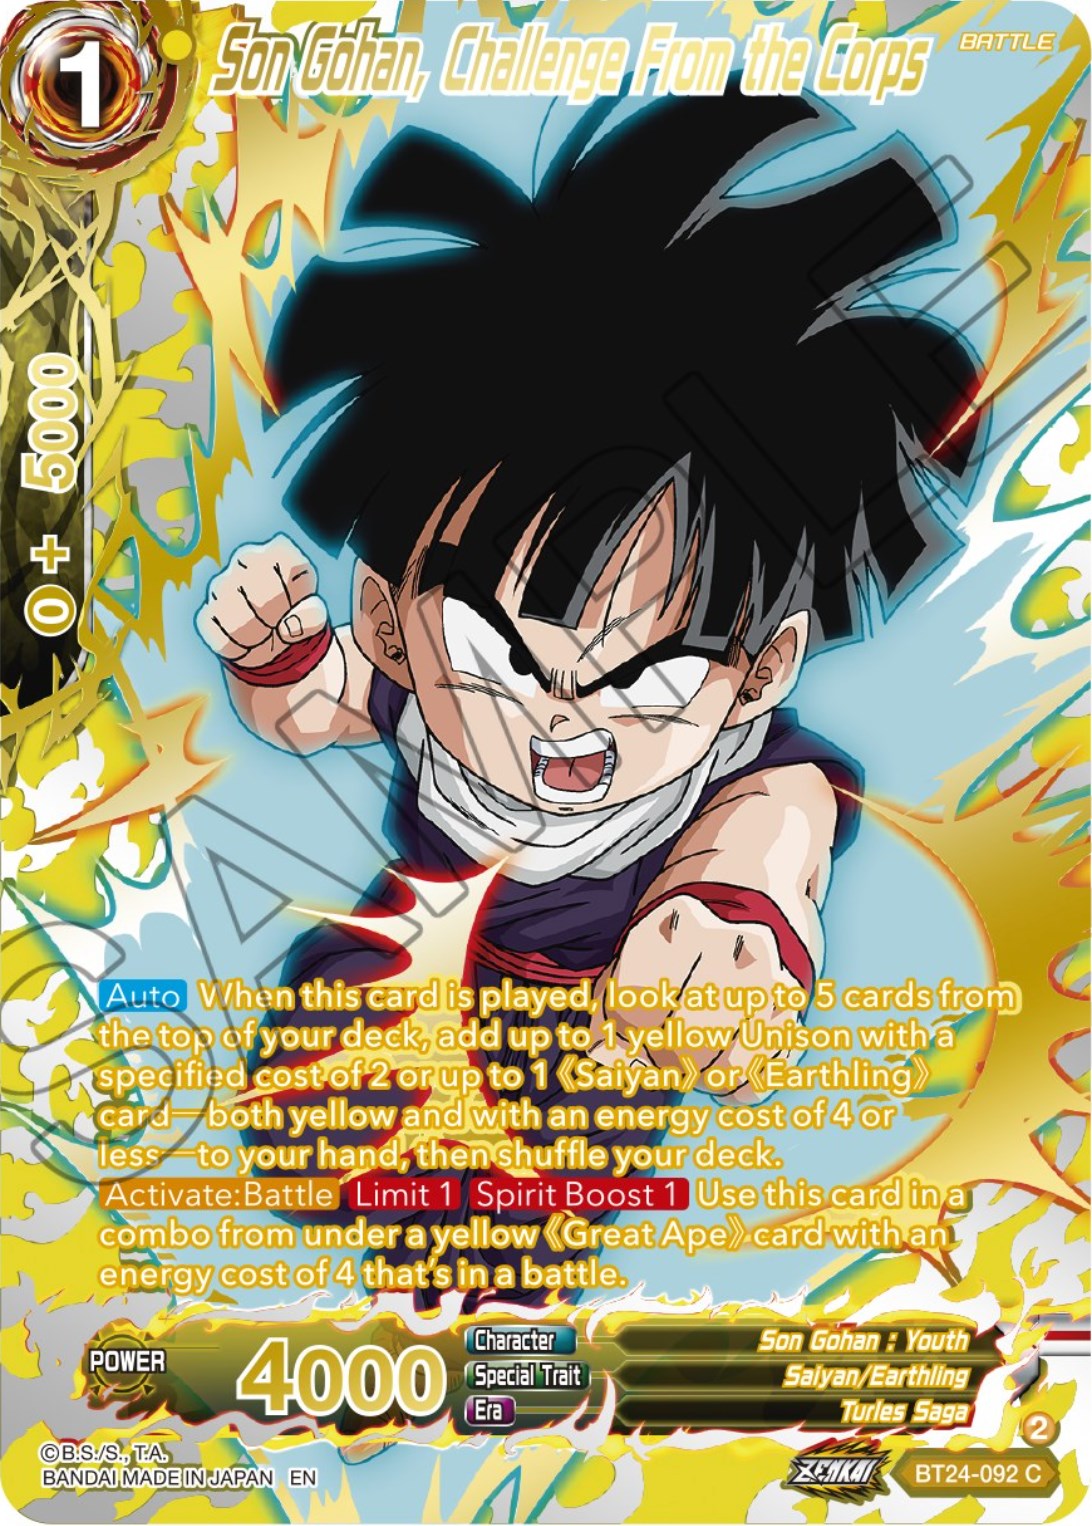 Son Gohan, Challenge From the Corps (Collector Booster) (BT24-092) [Beyond Generations] | Event Horizon Hobbies CA